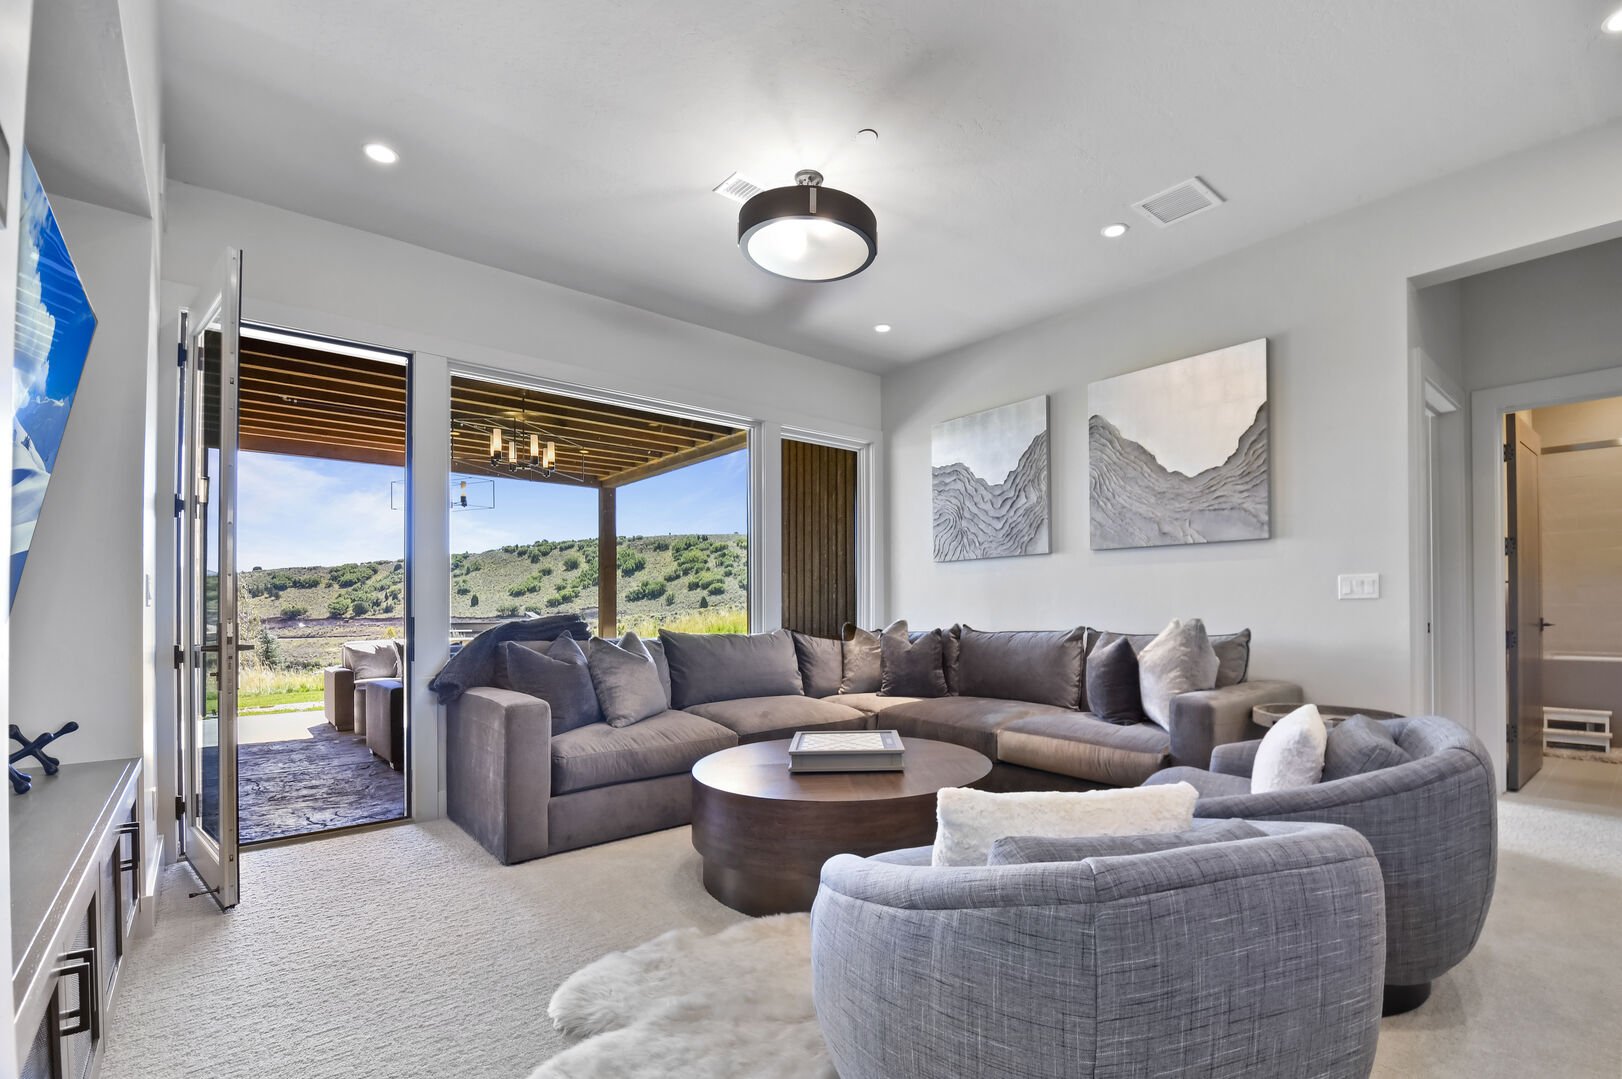 Second living room with spacious sectional.